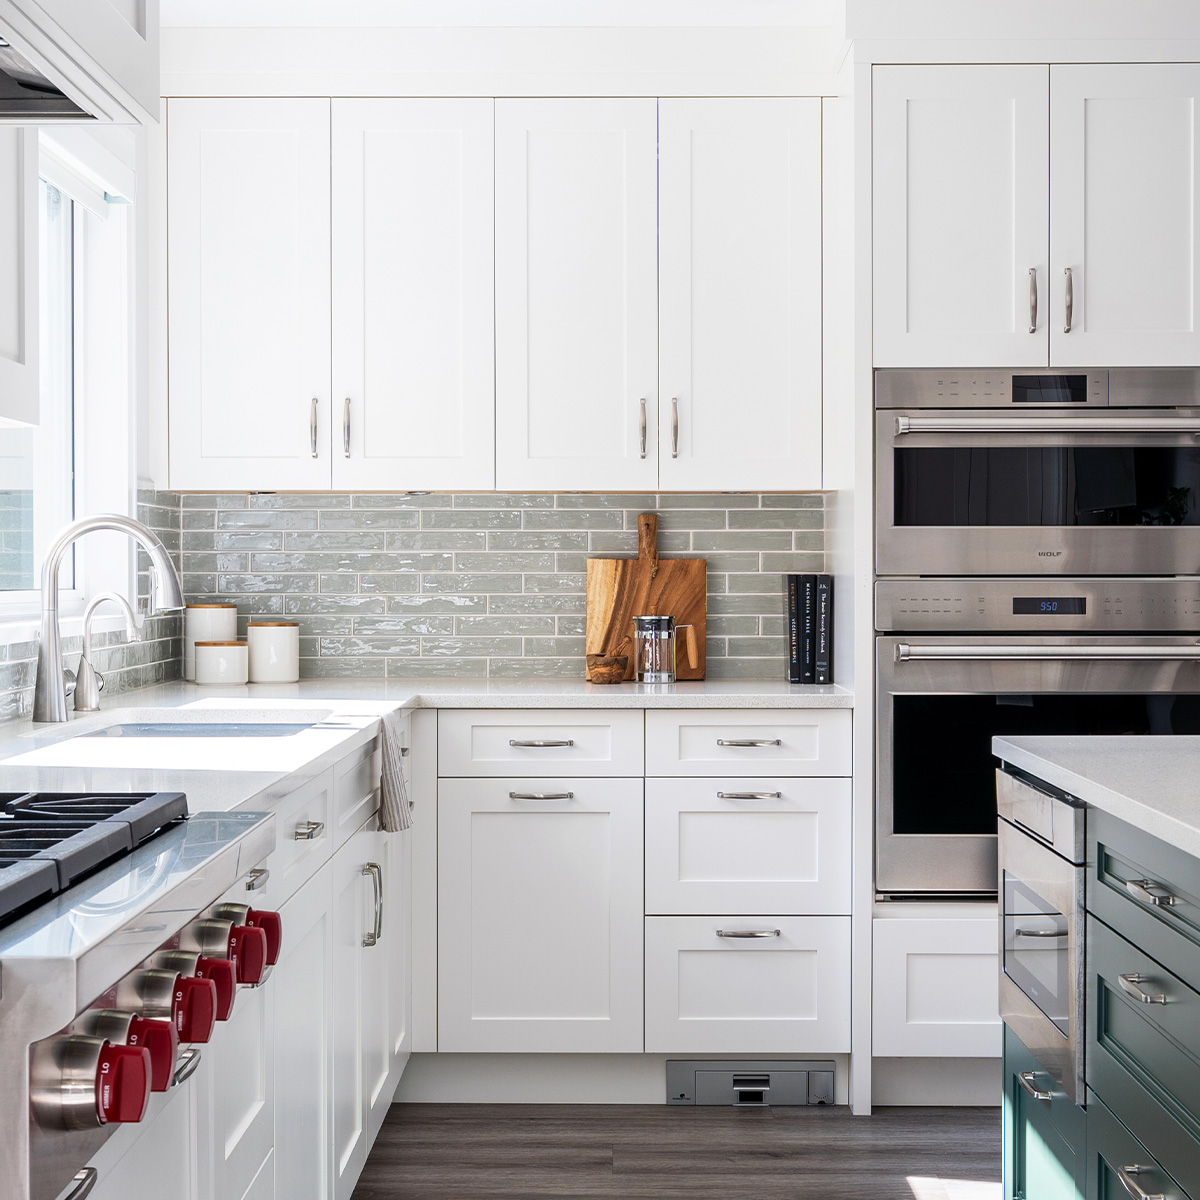 Sleek kitchen design featuring white cabinets and stainless steel oven.